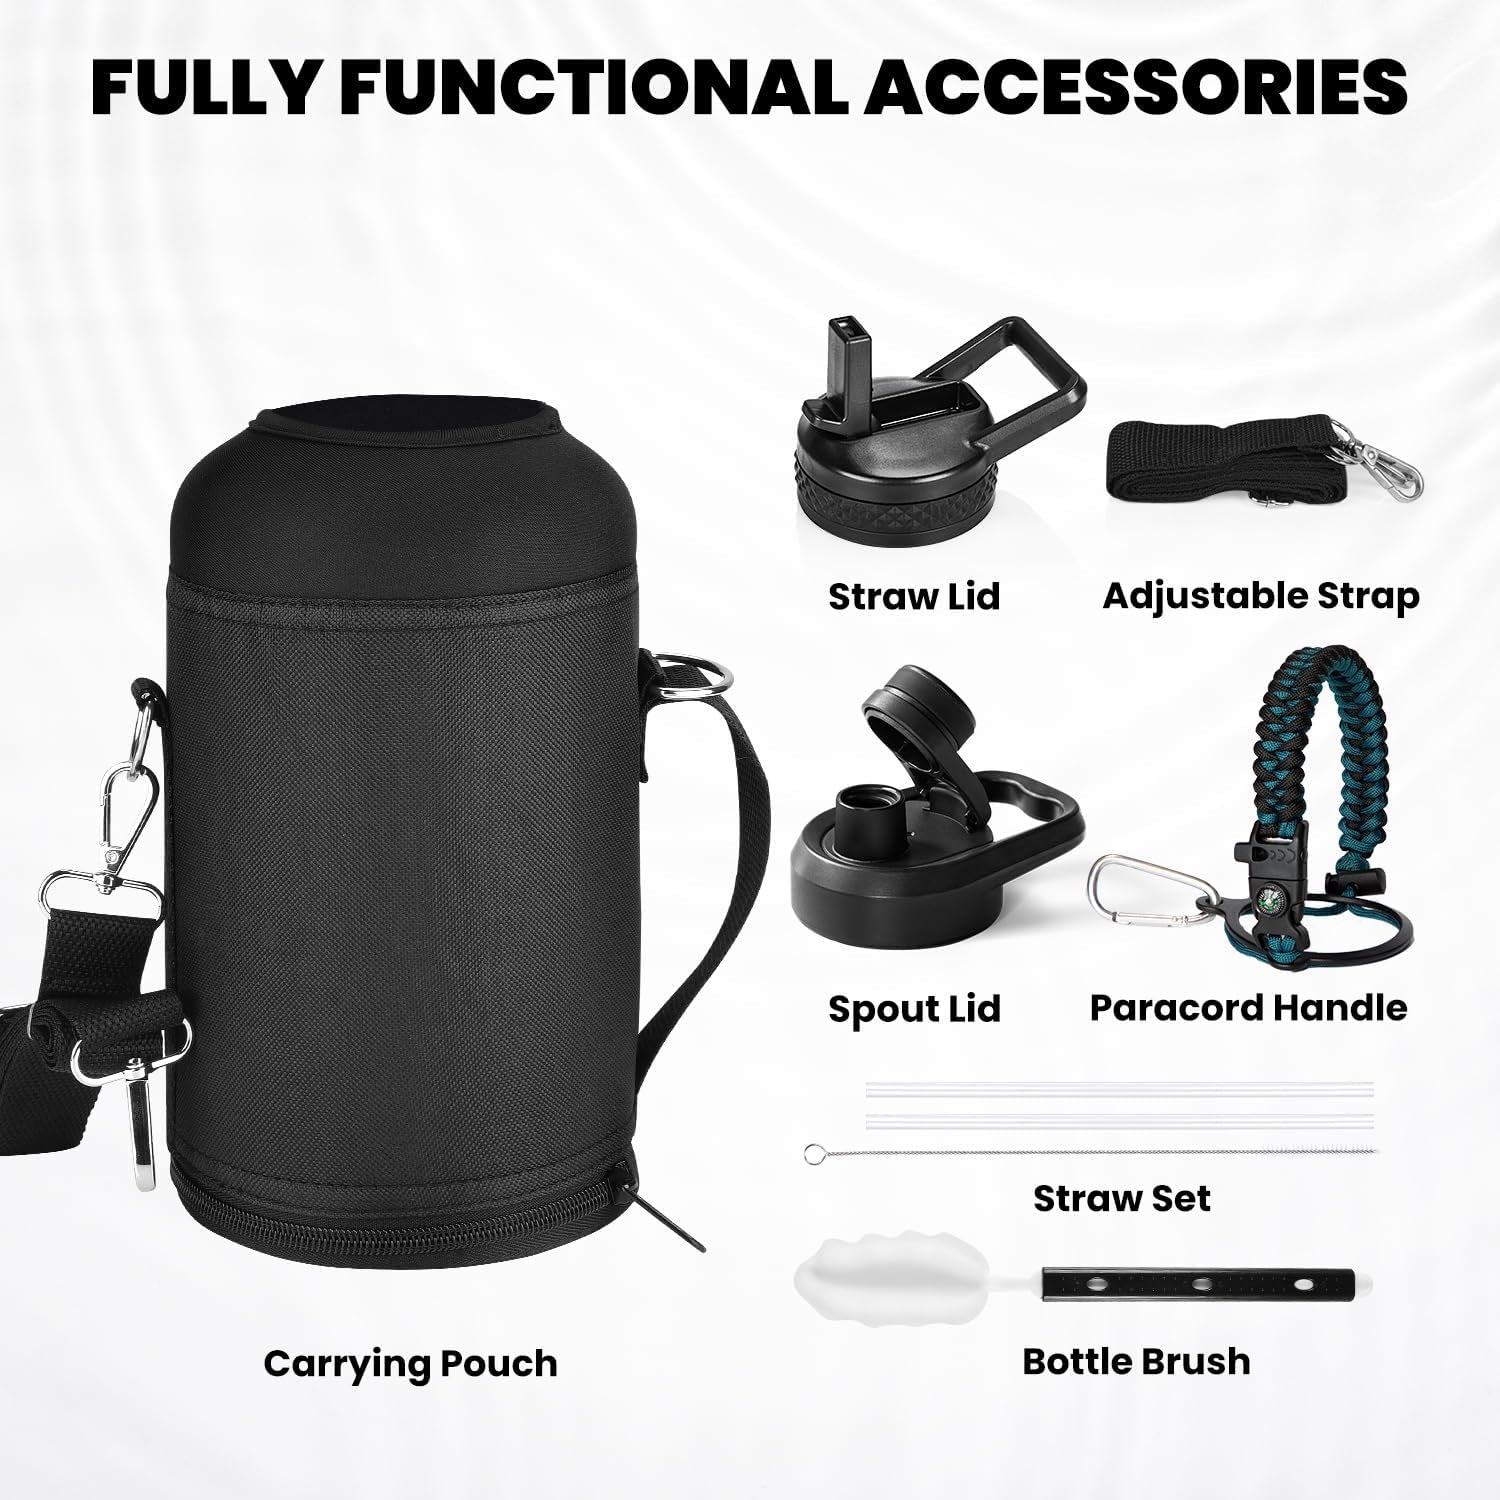 Insulated Water Bottle 64 Oz, Triple Wall Vacuum Stainless Steel (Cold for 48 Hrs), Leak Proof & Non-Bpa, Half Gallon Water Flask Jug with Paracord Handle & Straw Spout Lids